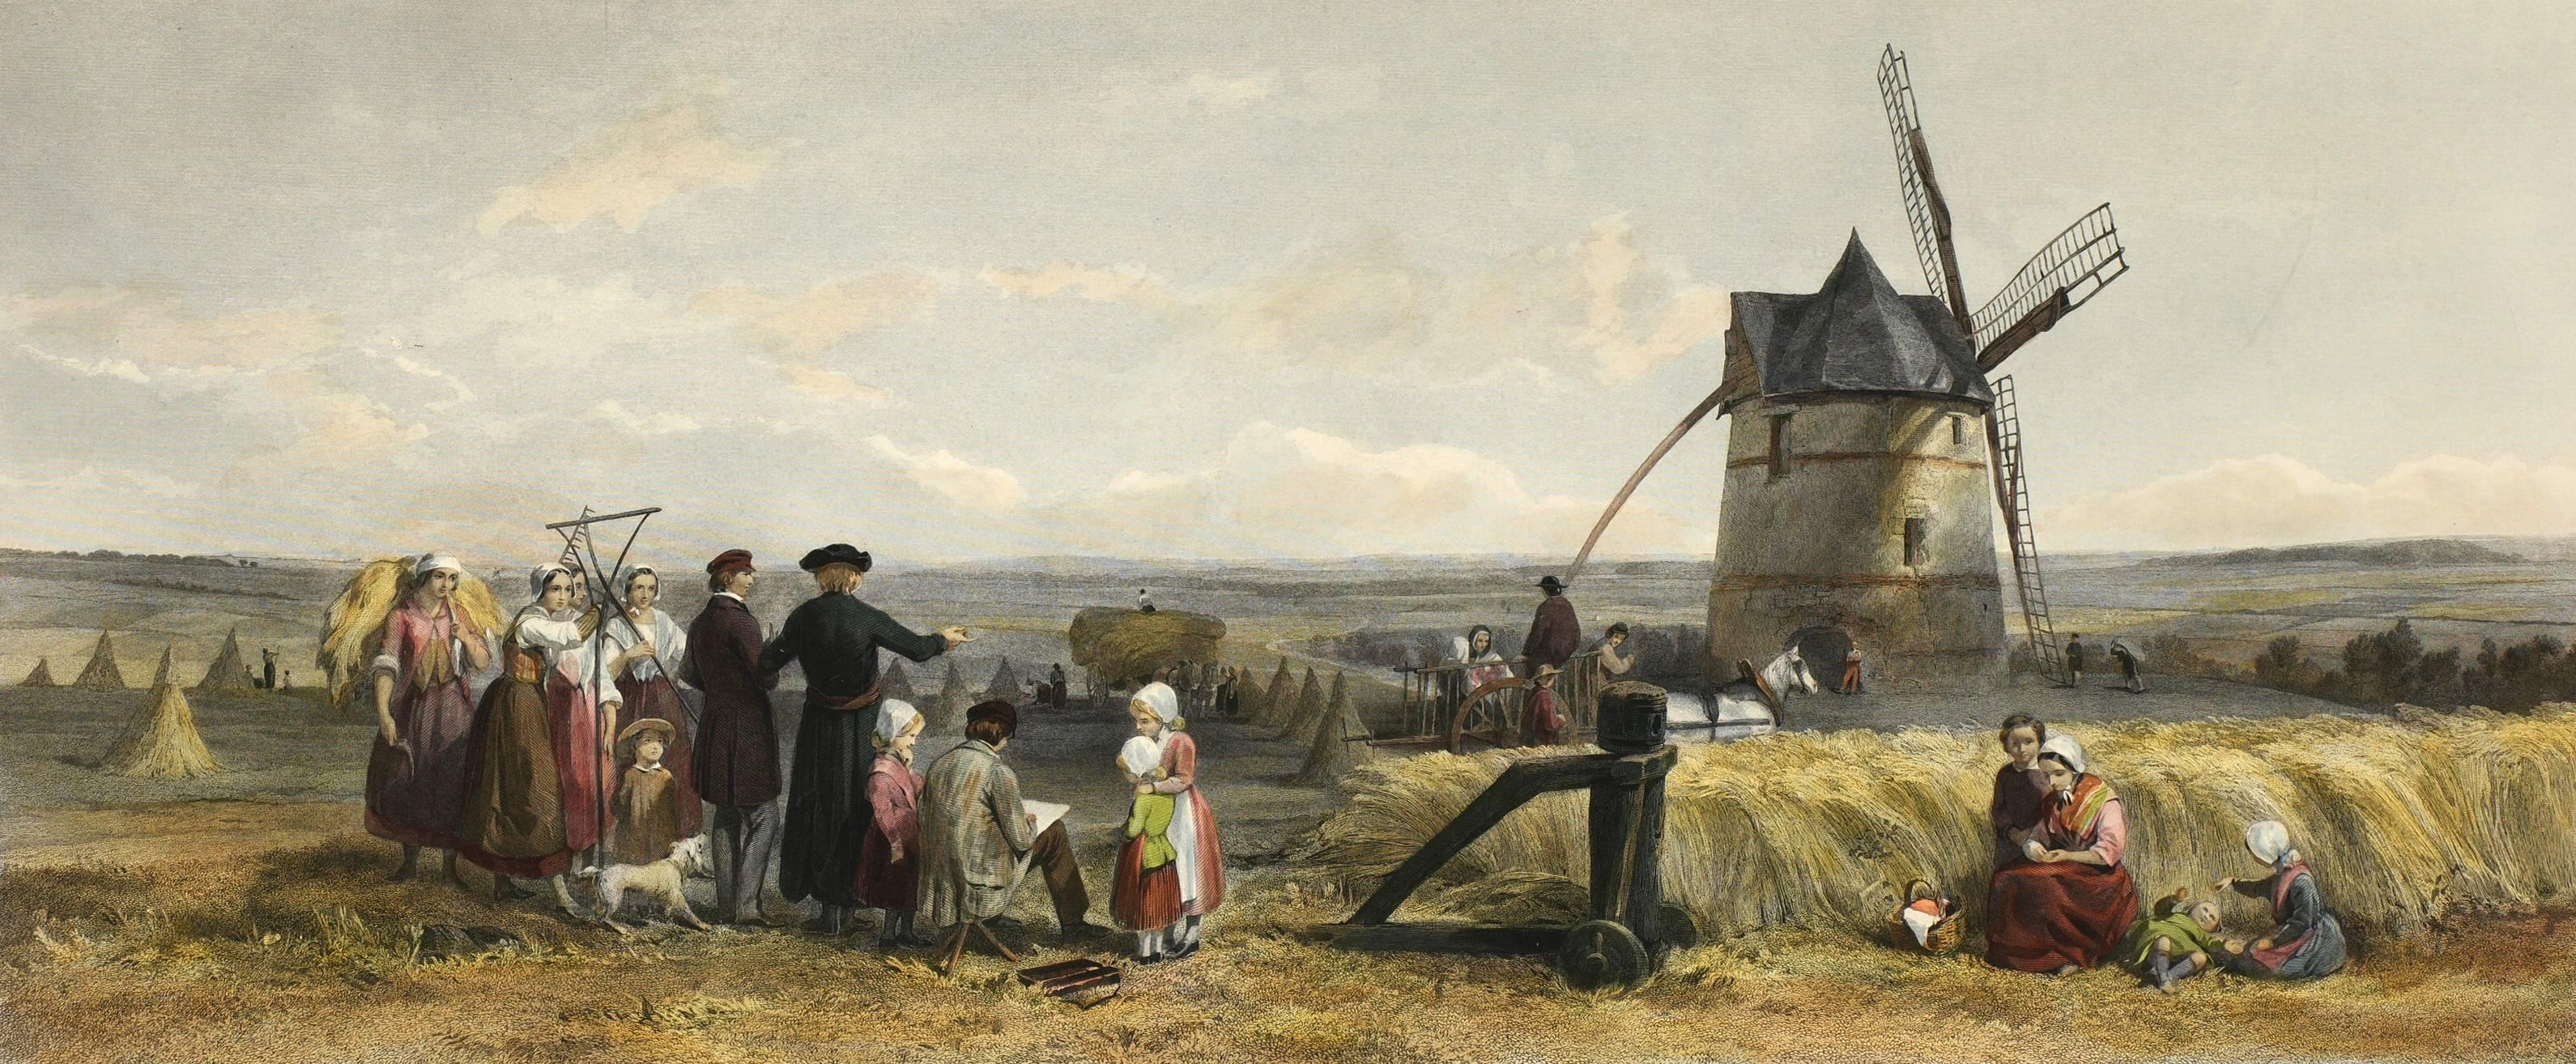 The Field with Windmill  - Print by John Absolom.